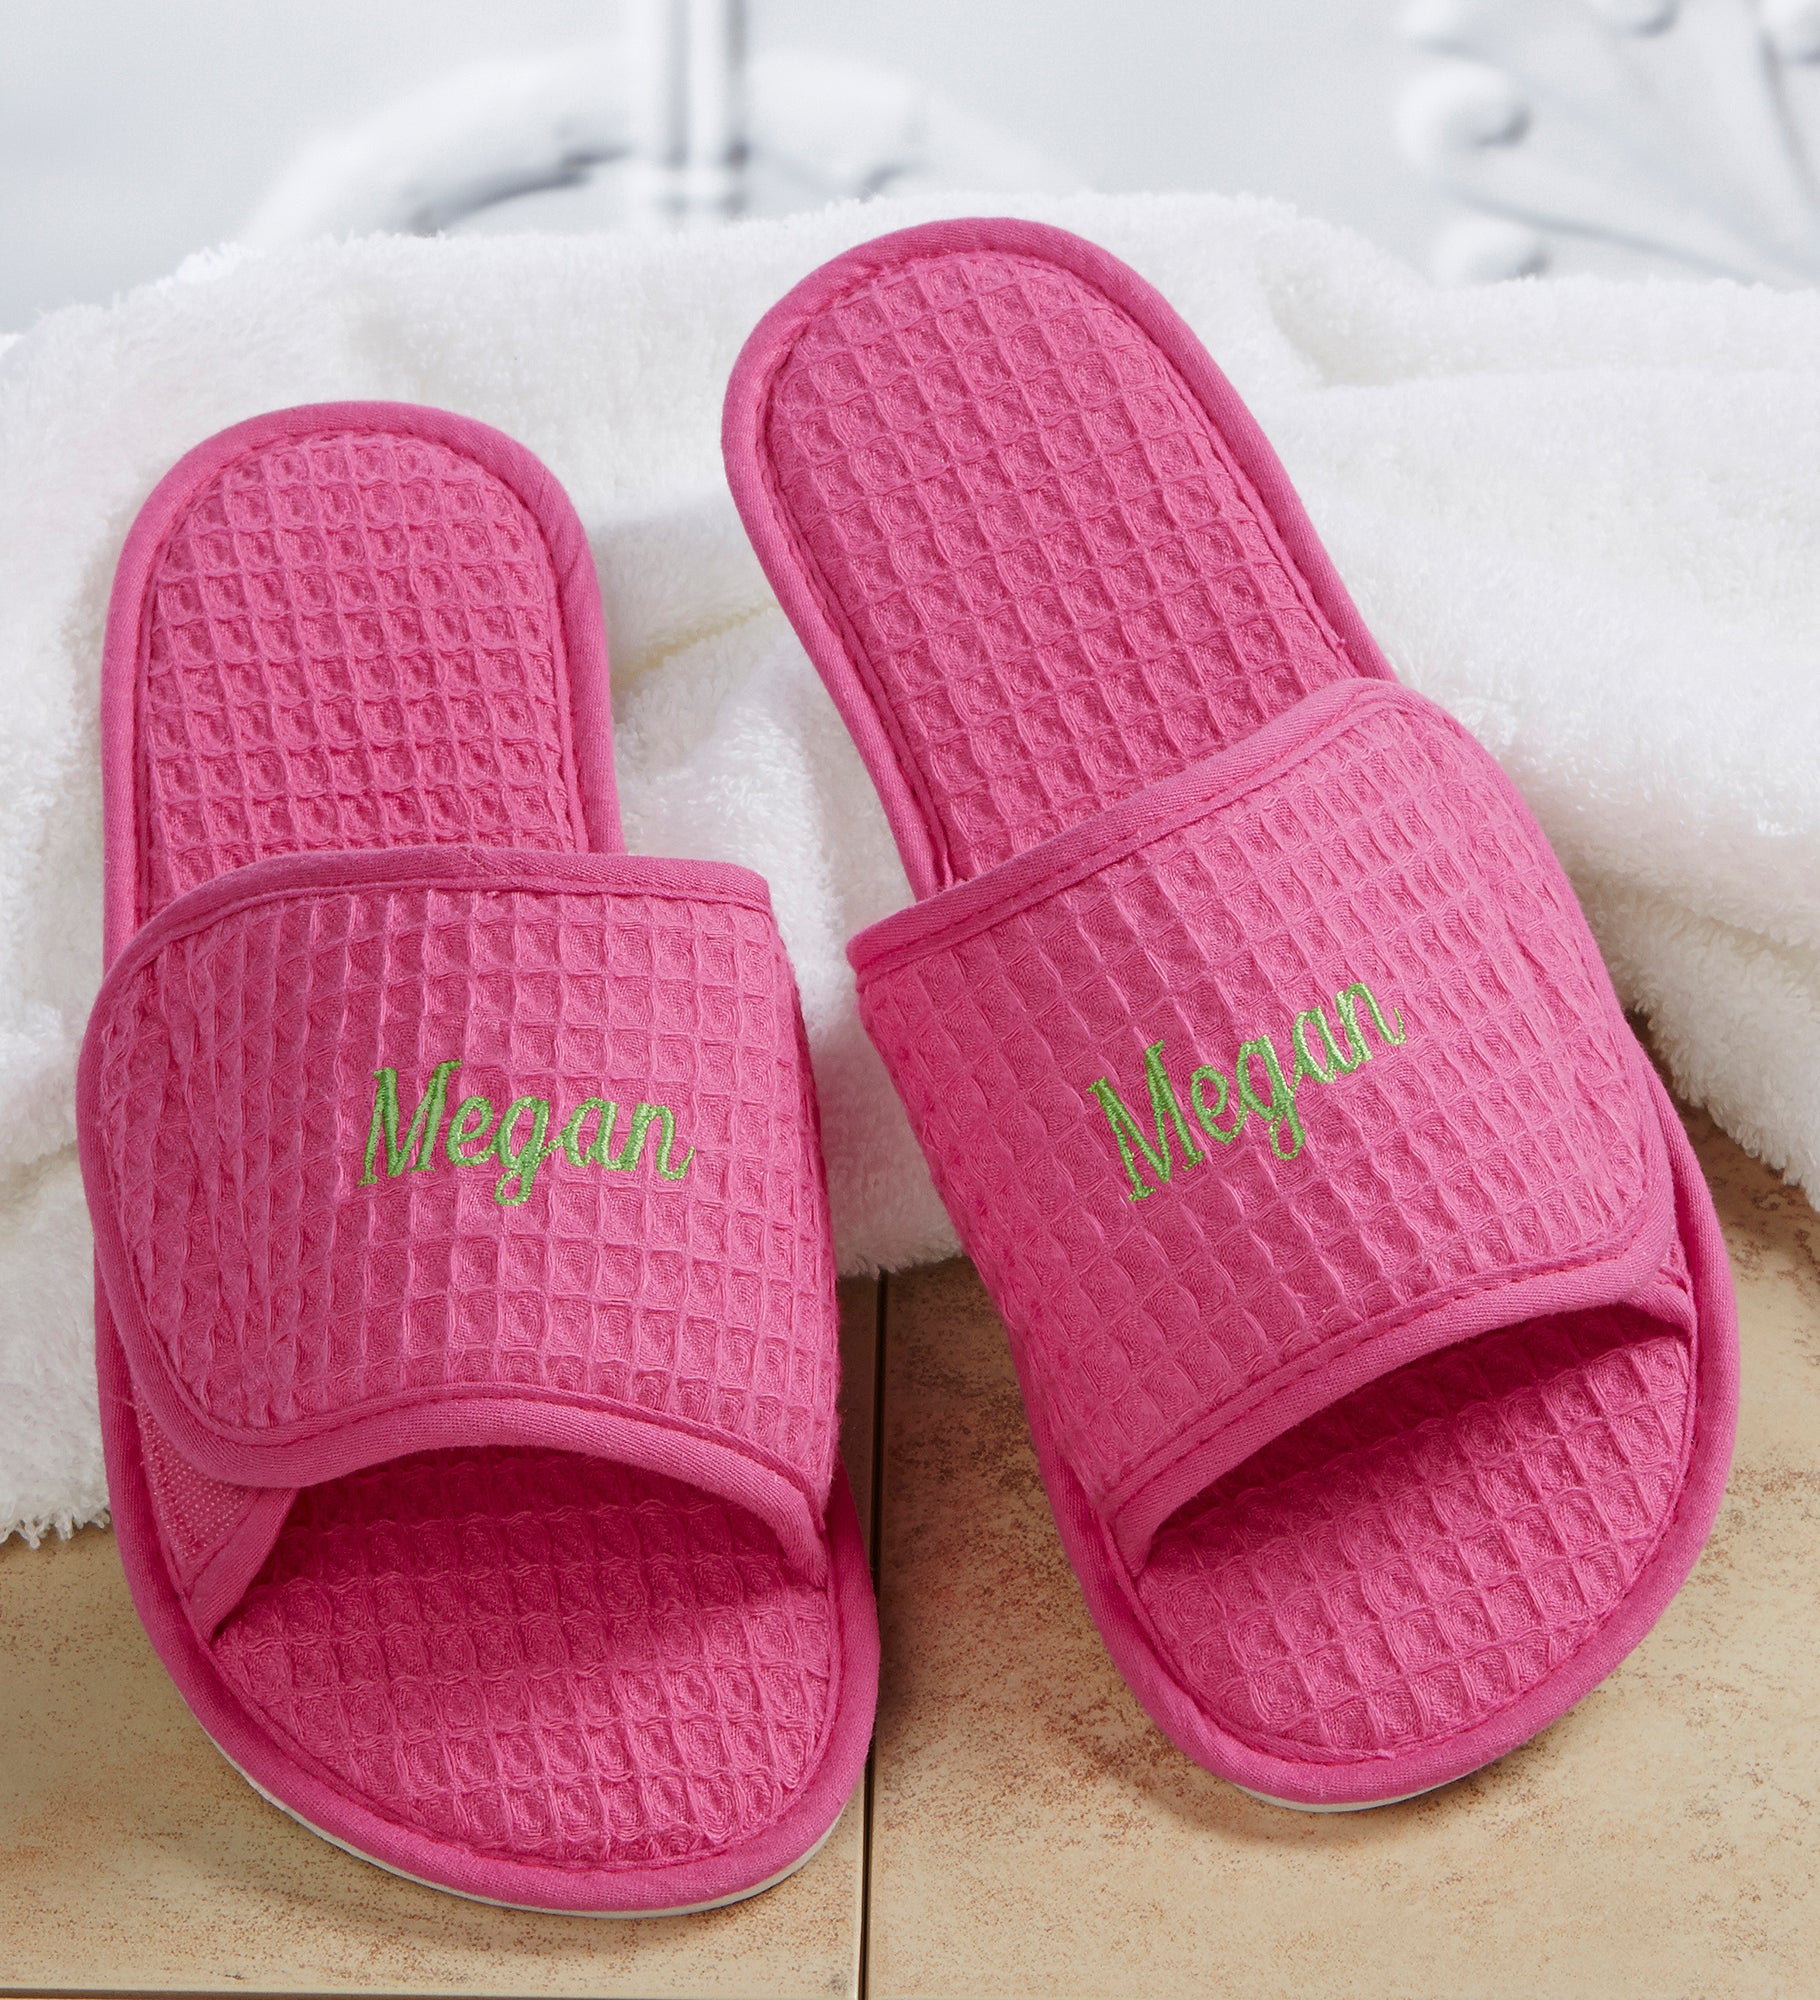 Embroidered Waffle Weave Spa Slippers